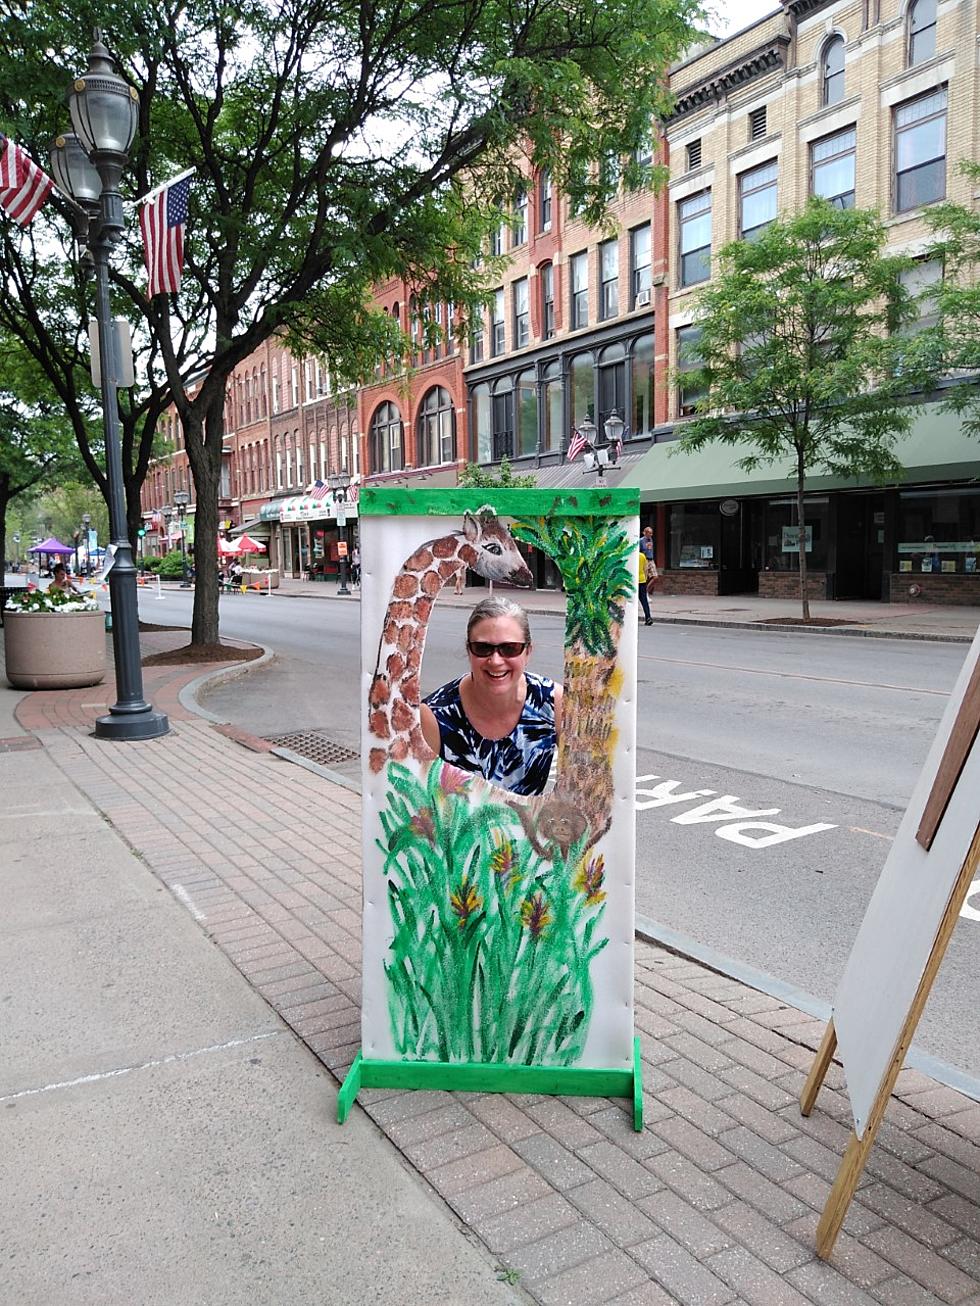 'Meet Me on Main St.' Kickoff Sets Awesome Tone For Summer Fun